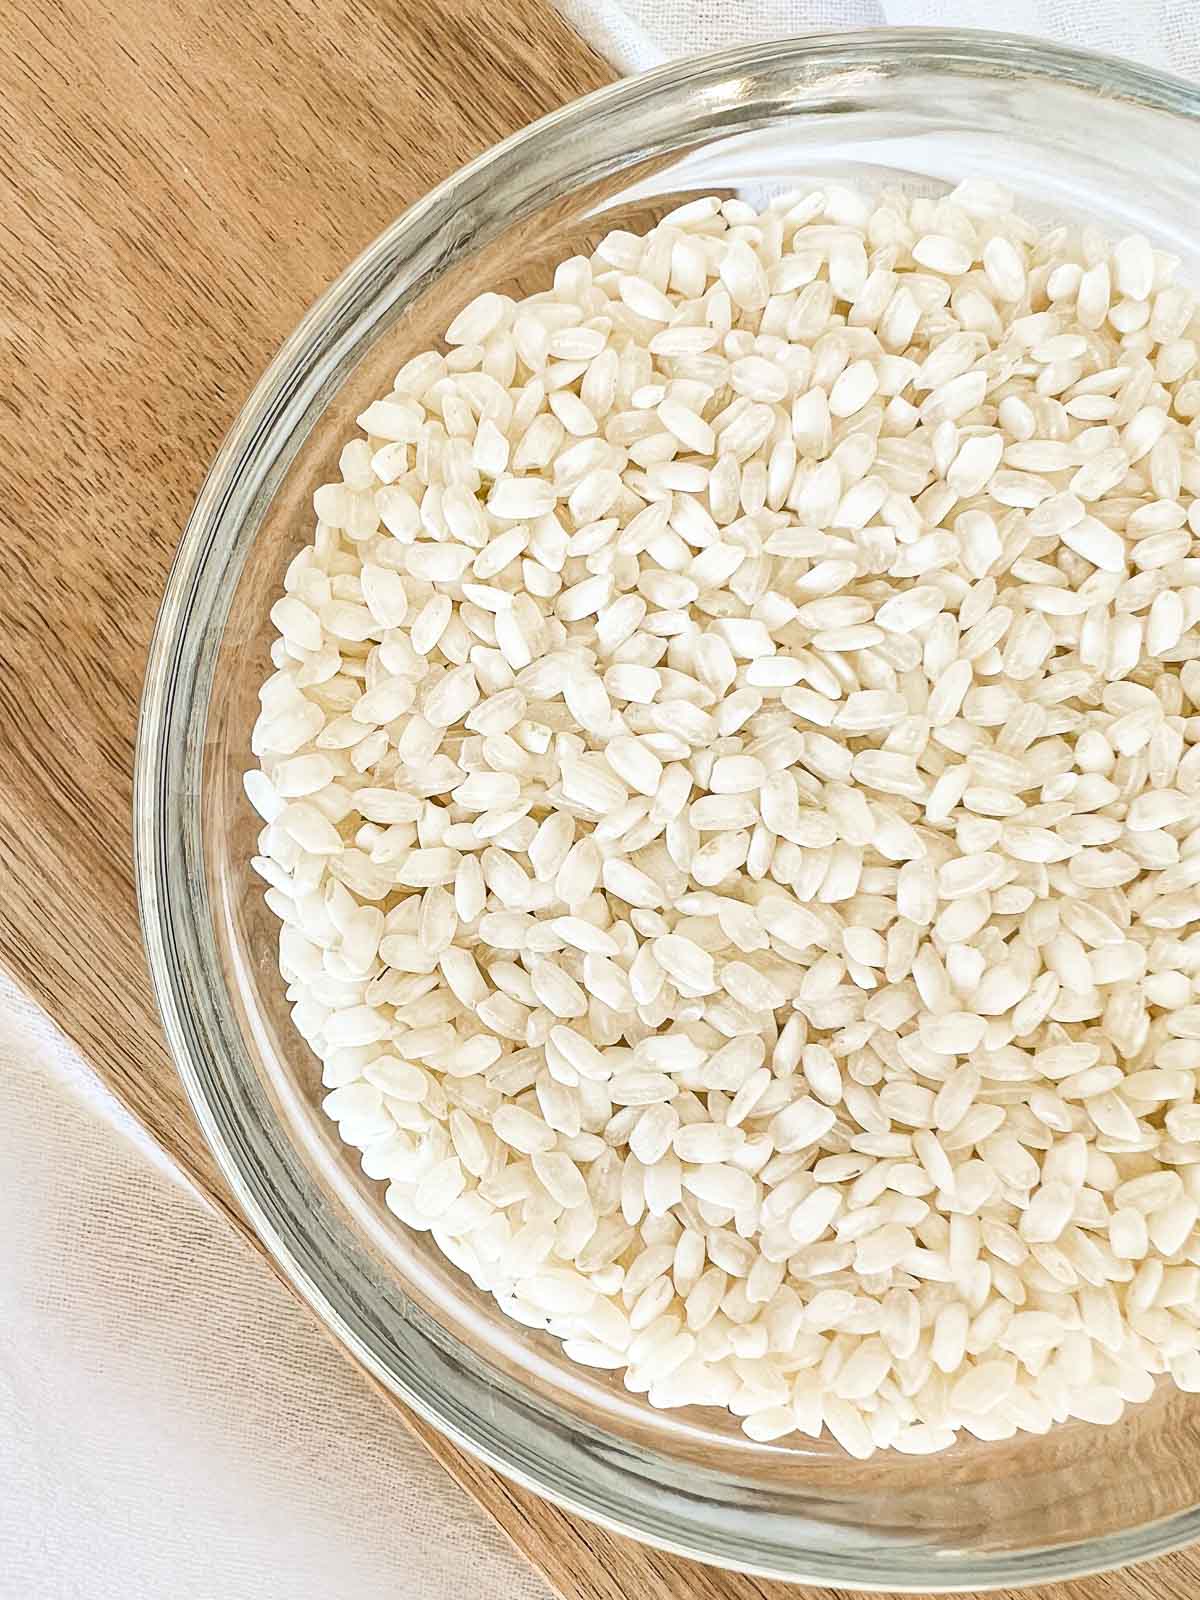 Dry arborio rice in a glass bowl.